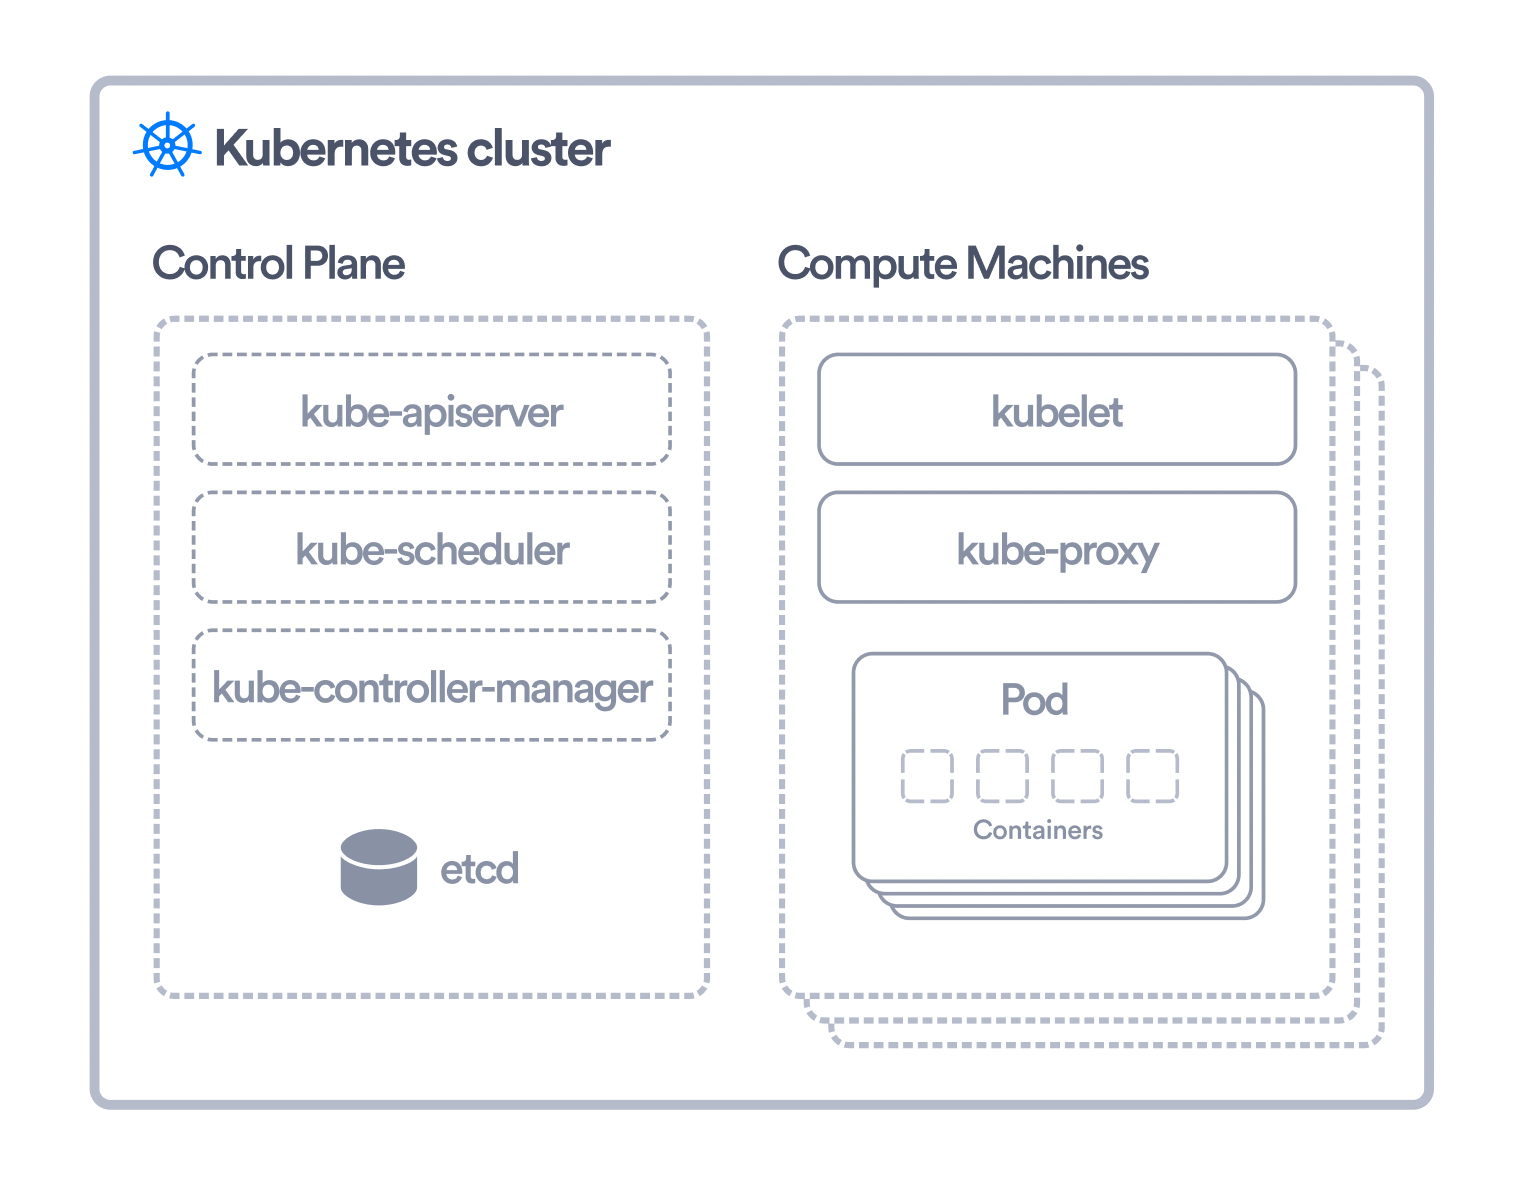 The basic componenets of a Kubernetes cluster